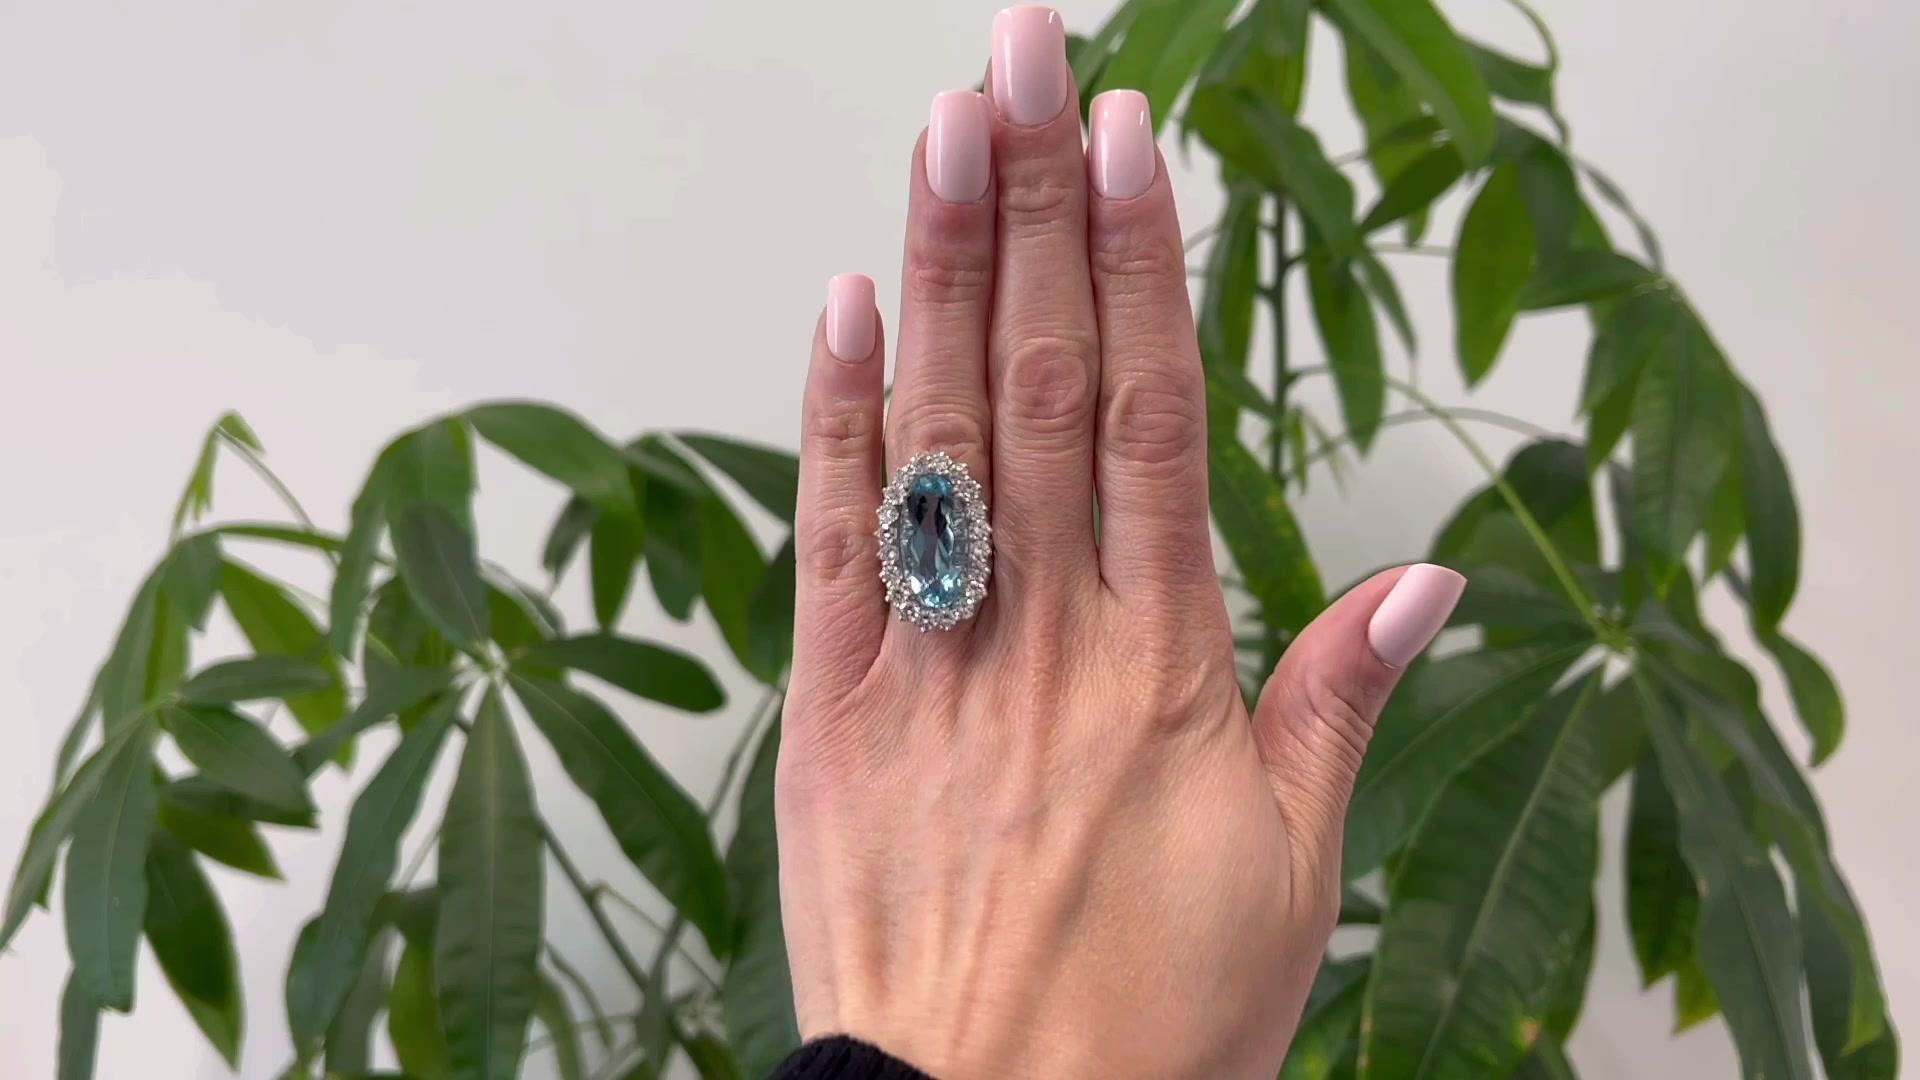 One Mid Century French 10.23 Carats Aquamarine Diamond Platinum Cluster Ring. Featuring one oval mixed cut aquamarine weighing 10.23 carats. Accented by 20 round brilliant cut diamonds with a total weight of approximately 2.00 carats, graded E-F